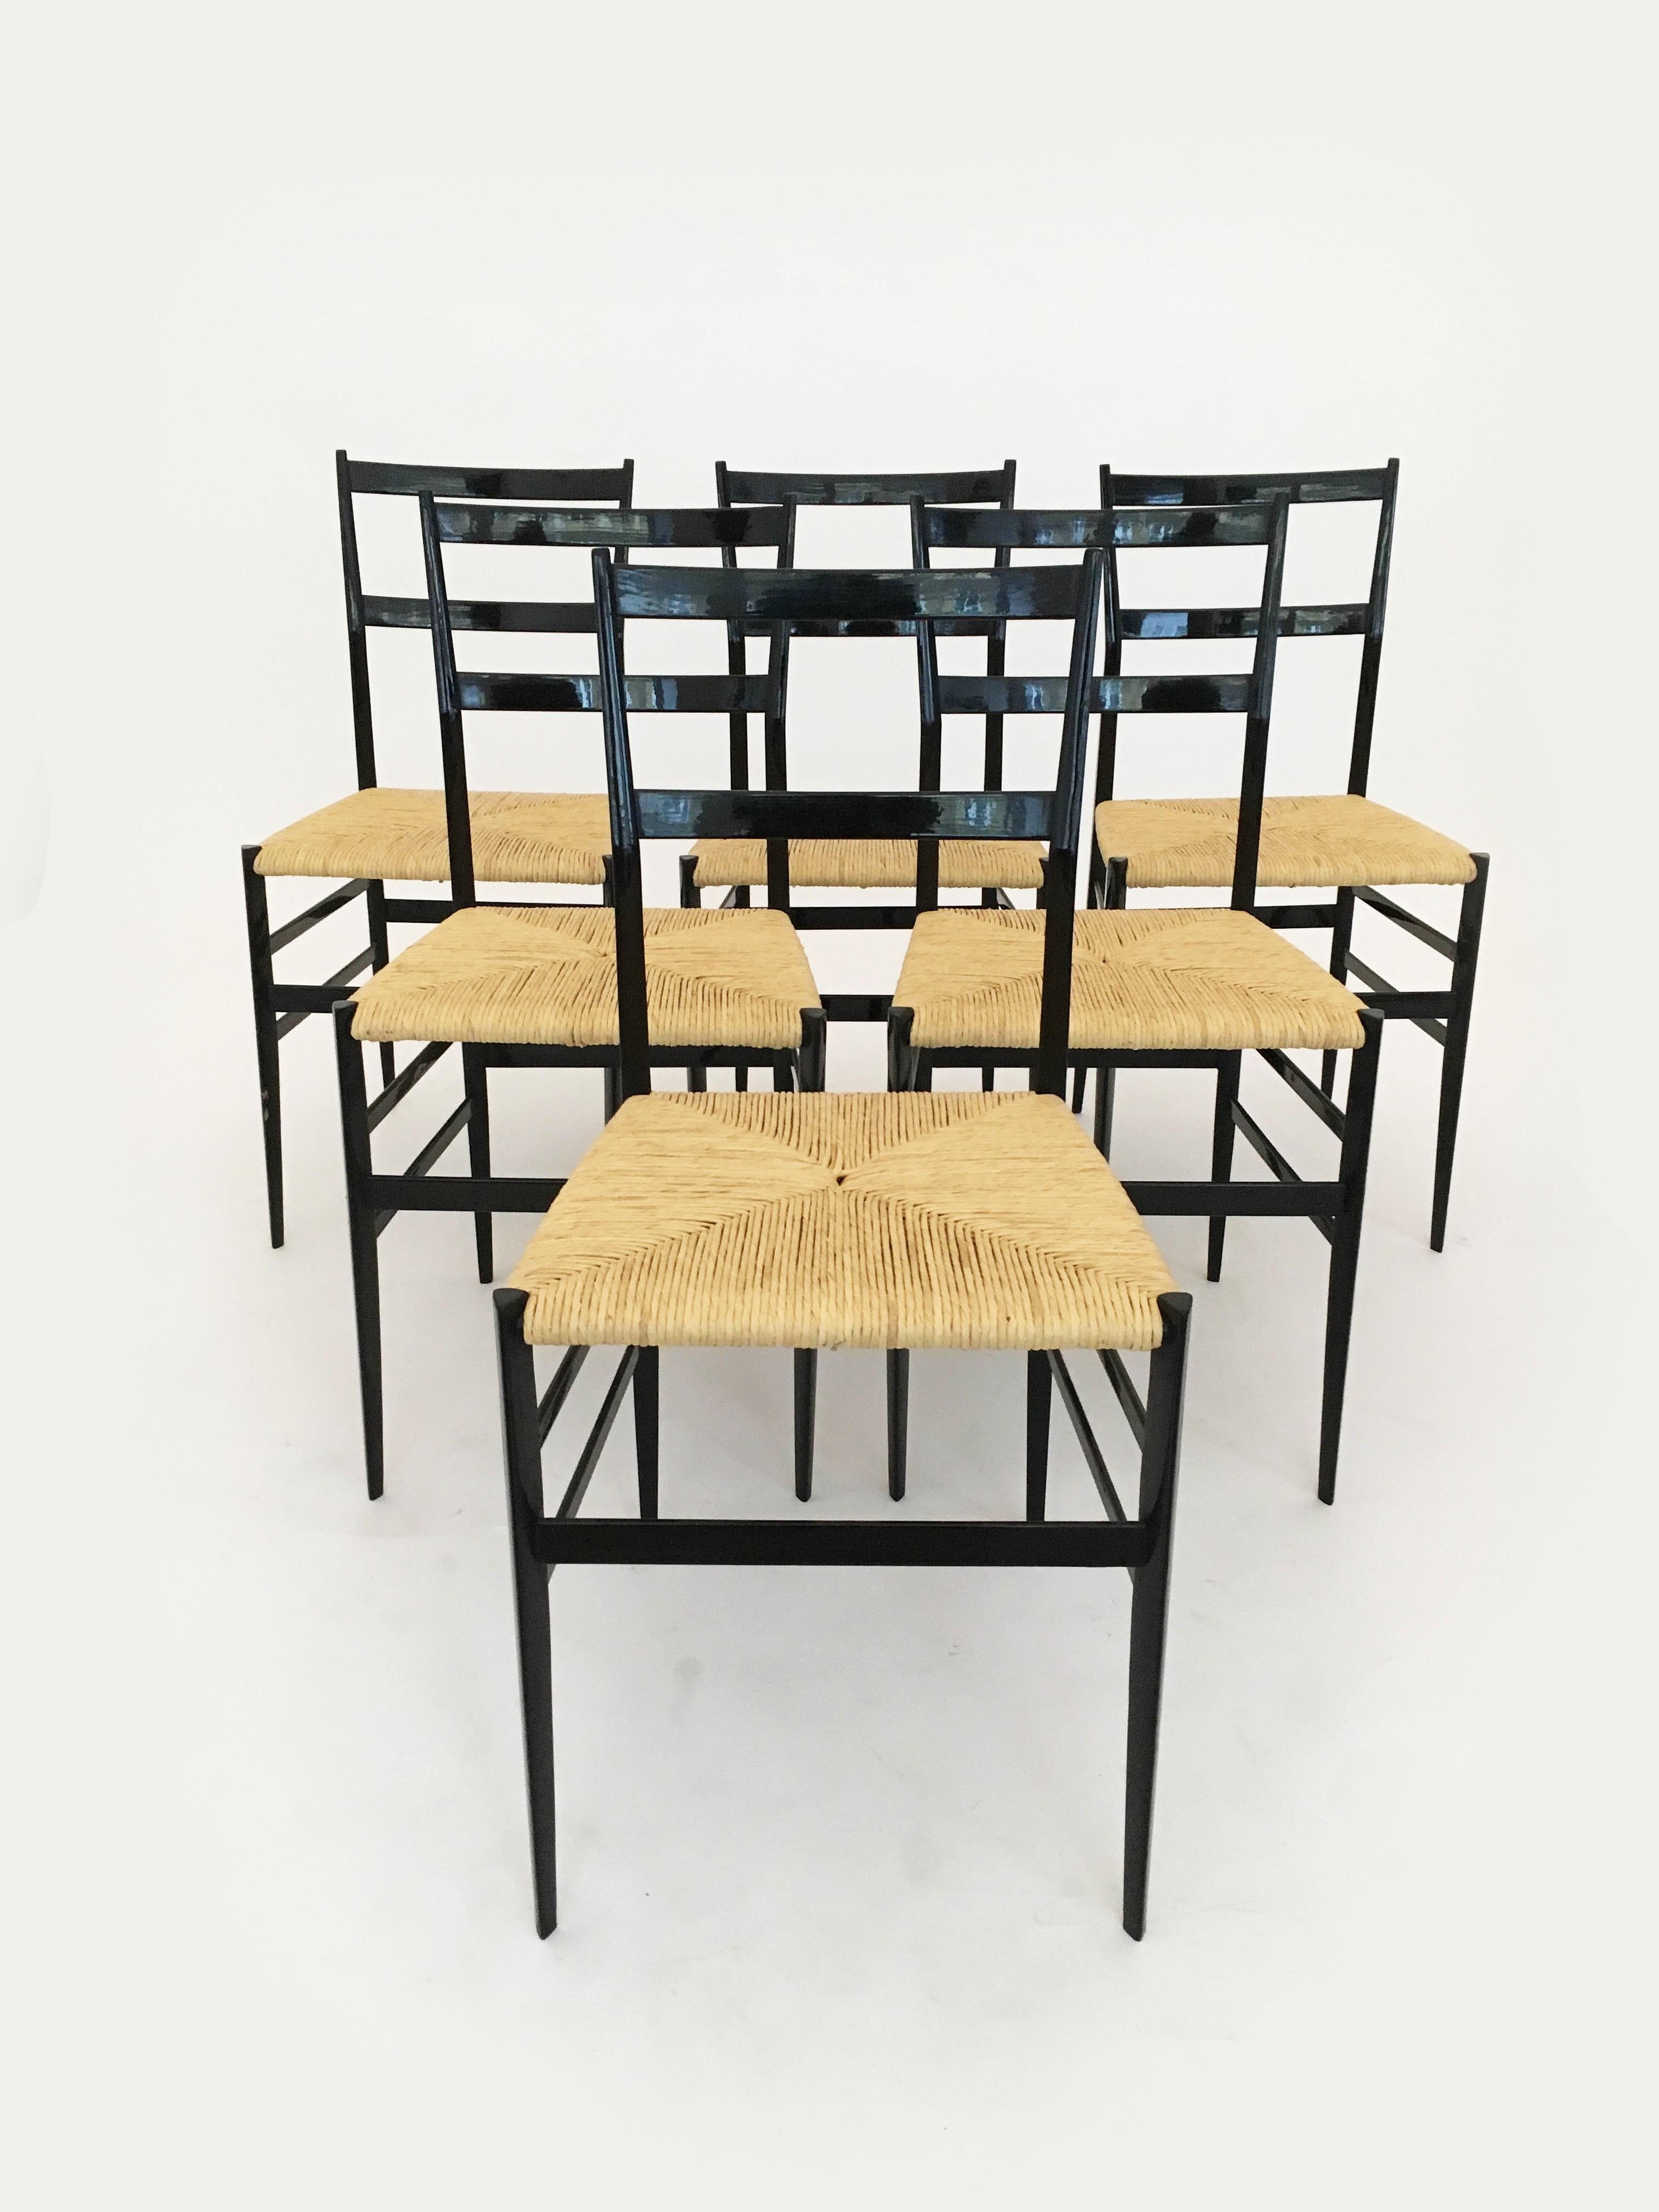 Delightful very early set of six vintage Gio Ponti Superleggera dining chairs by Cassina, Italy, 1958. We can pinpoint the date of production, because the inside of the frame is each stamped with the day of manufactur: 25 FEB. 1958. The Superleggera